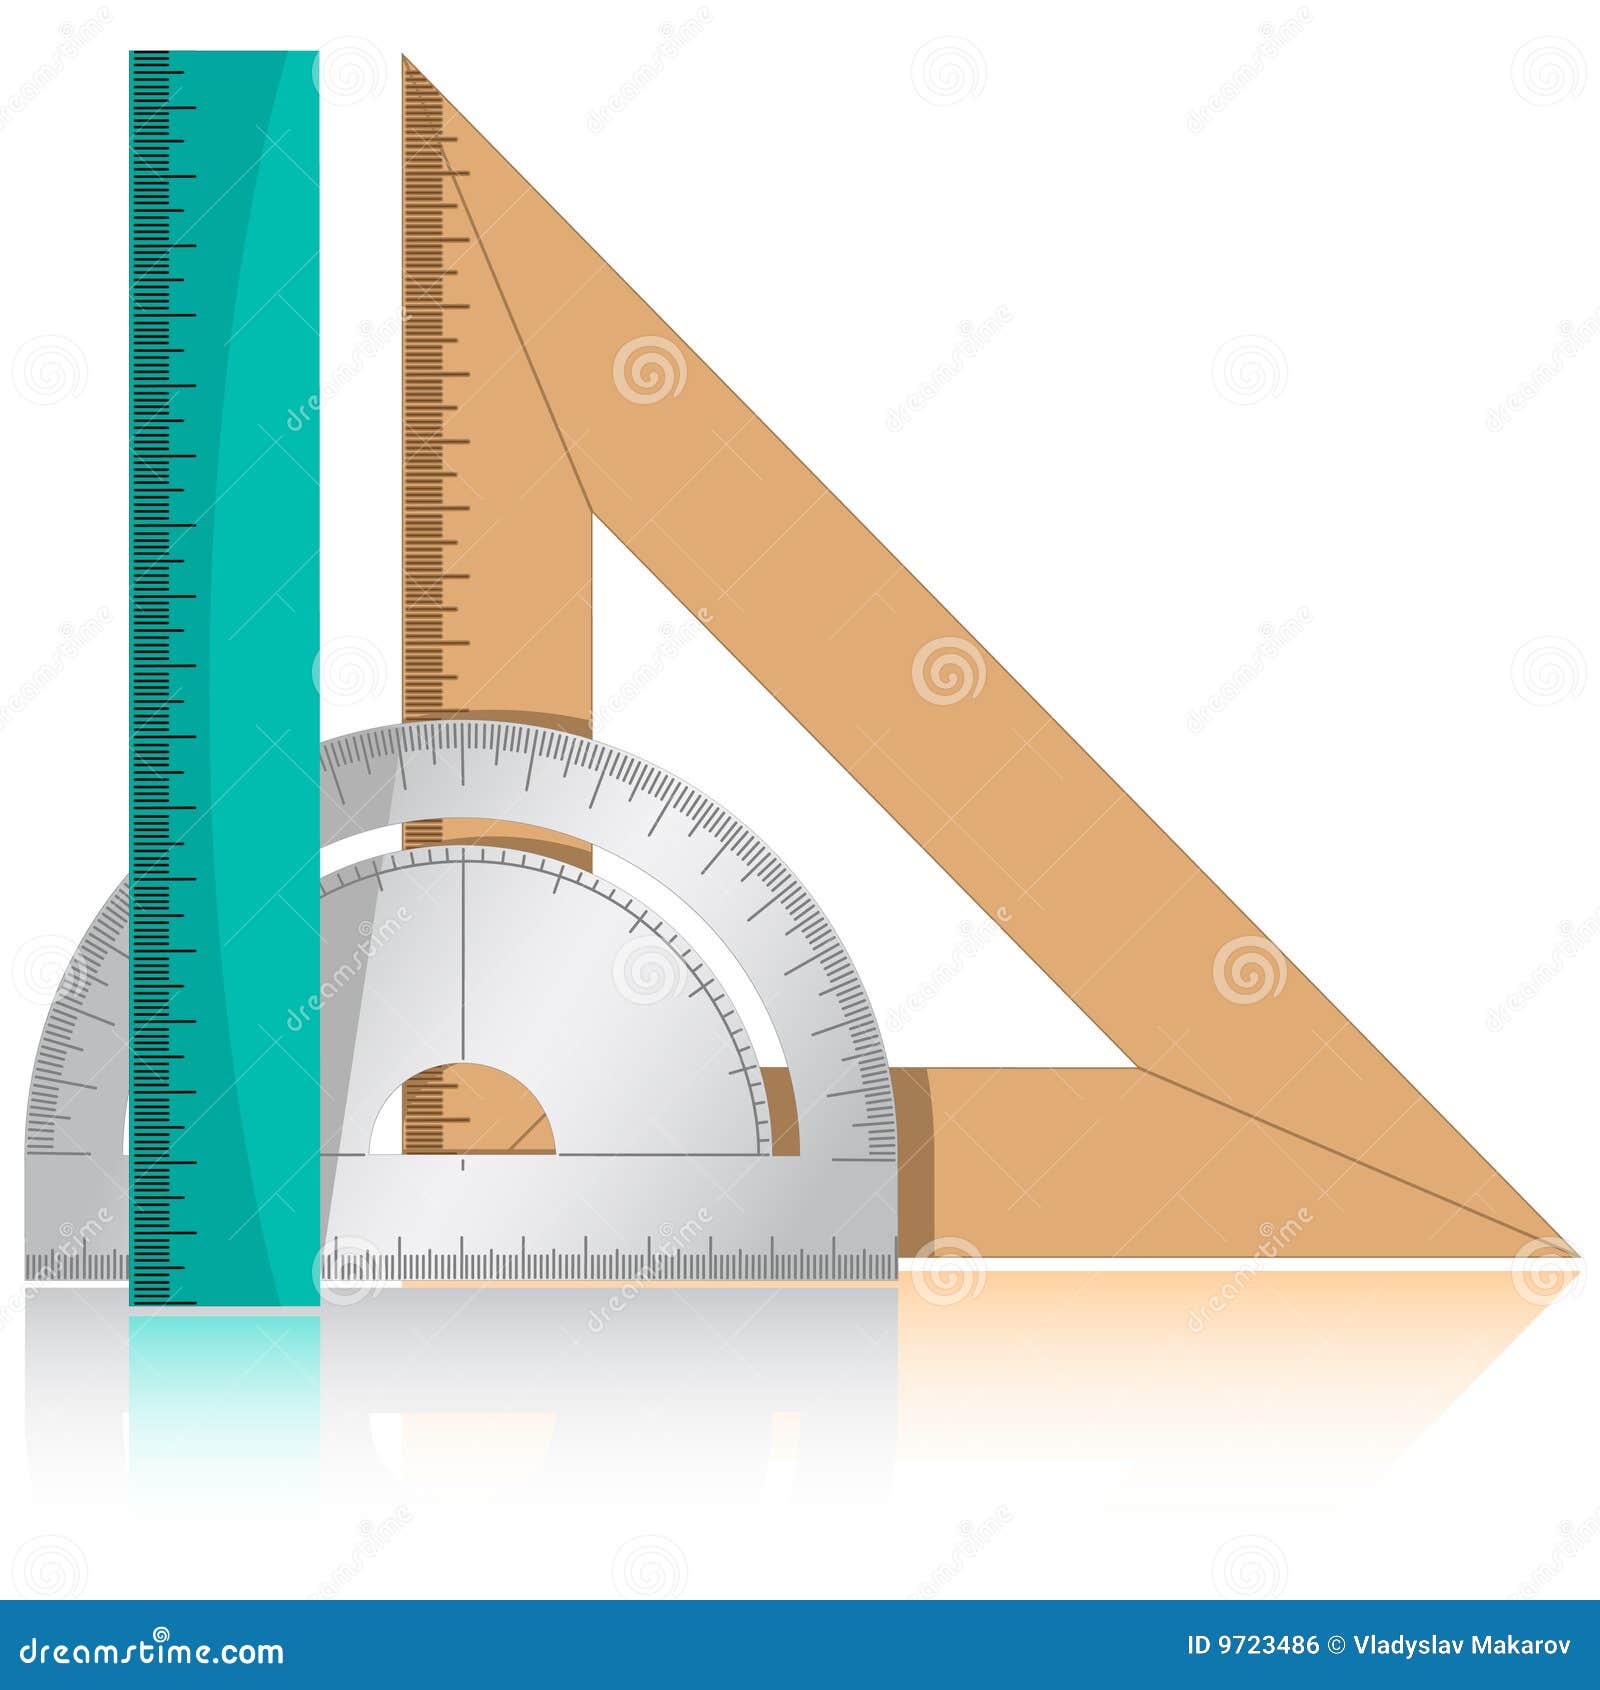 protractor and rulers